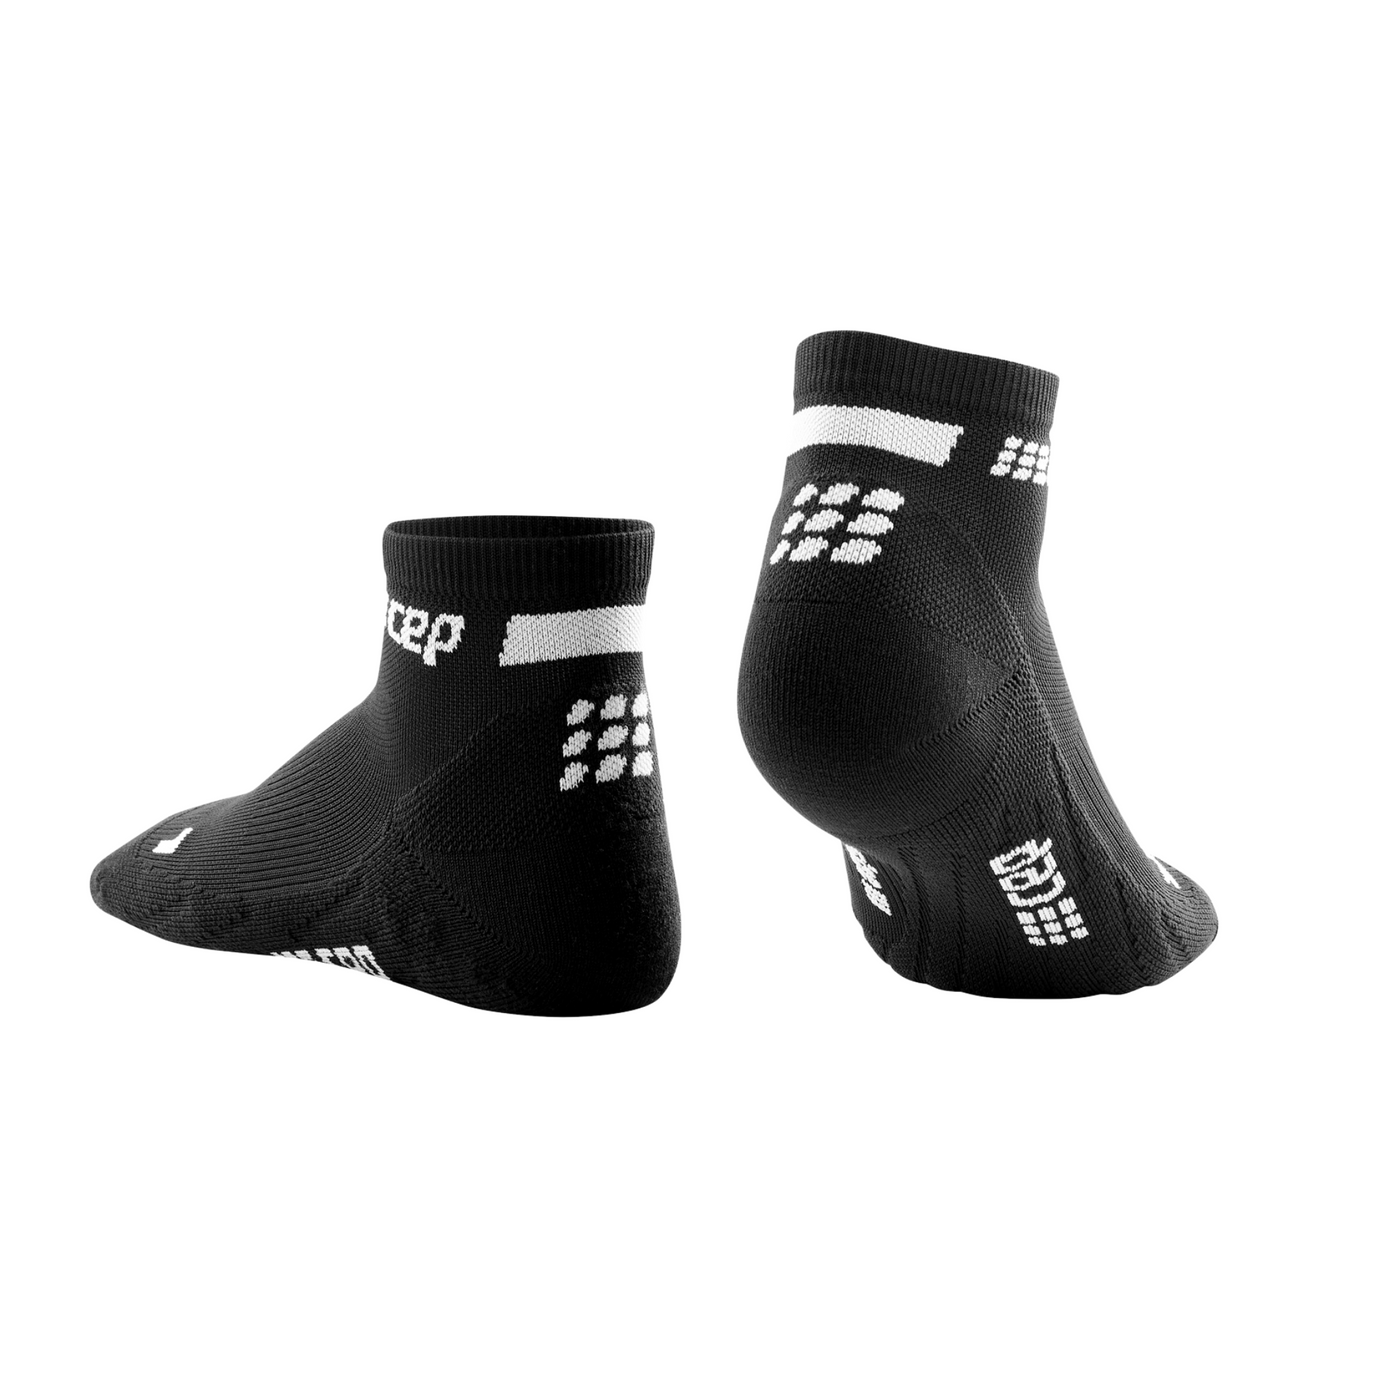 Calcetines LOW CUT The Run 4.0, Hombre